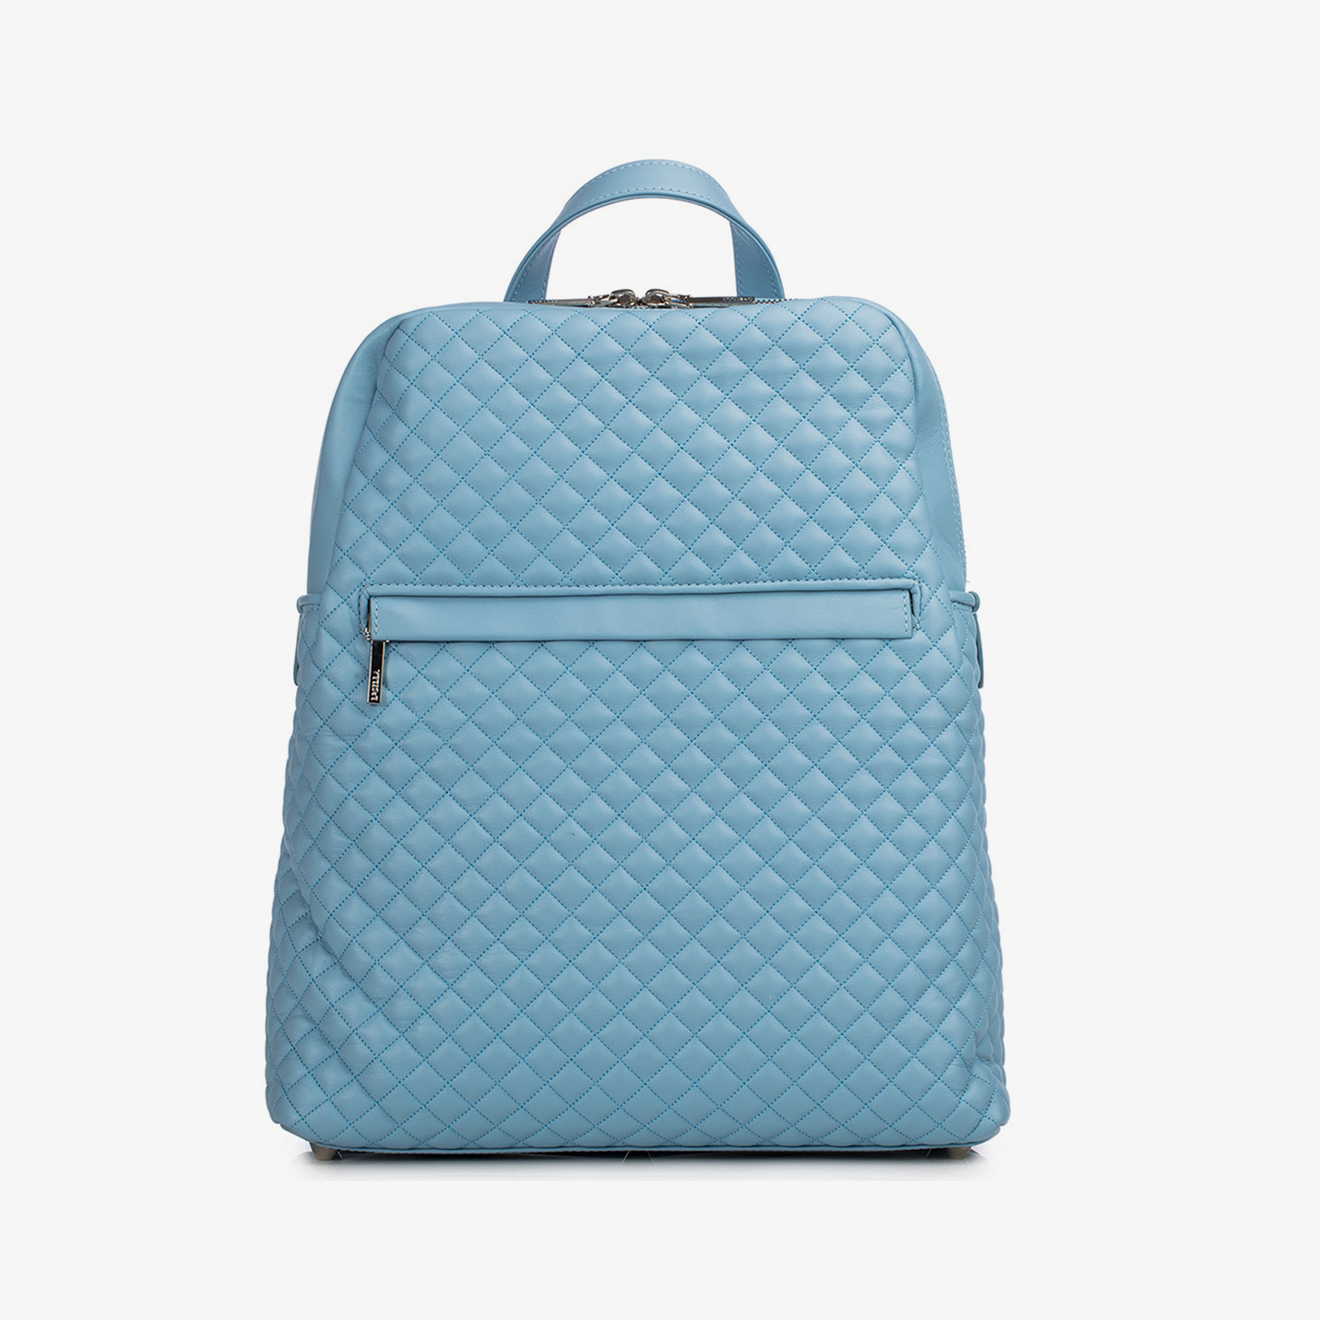 TYRA BACKPACK - Le Silla official outlet